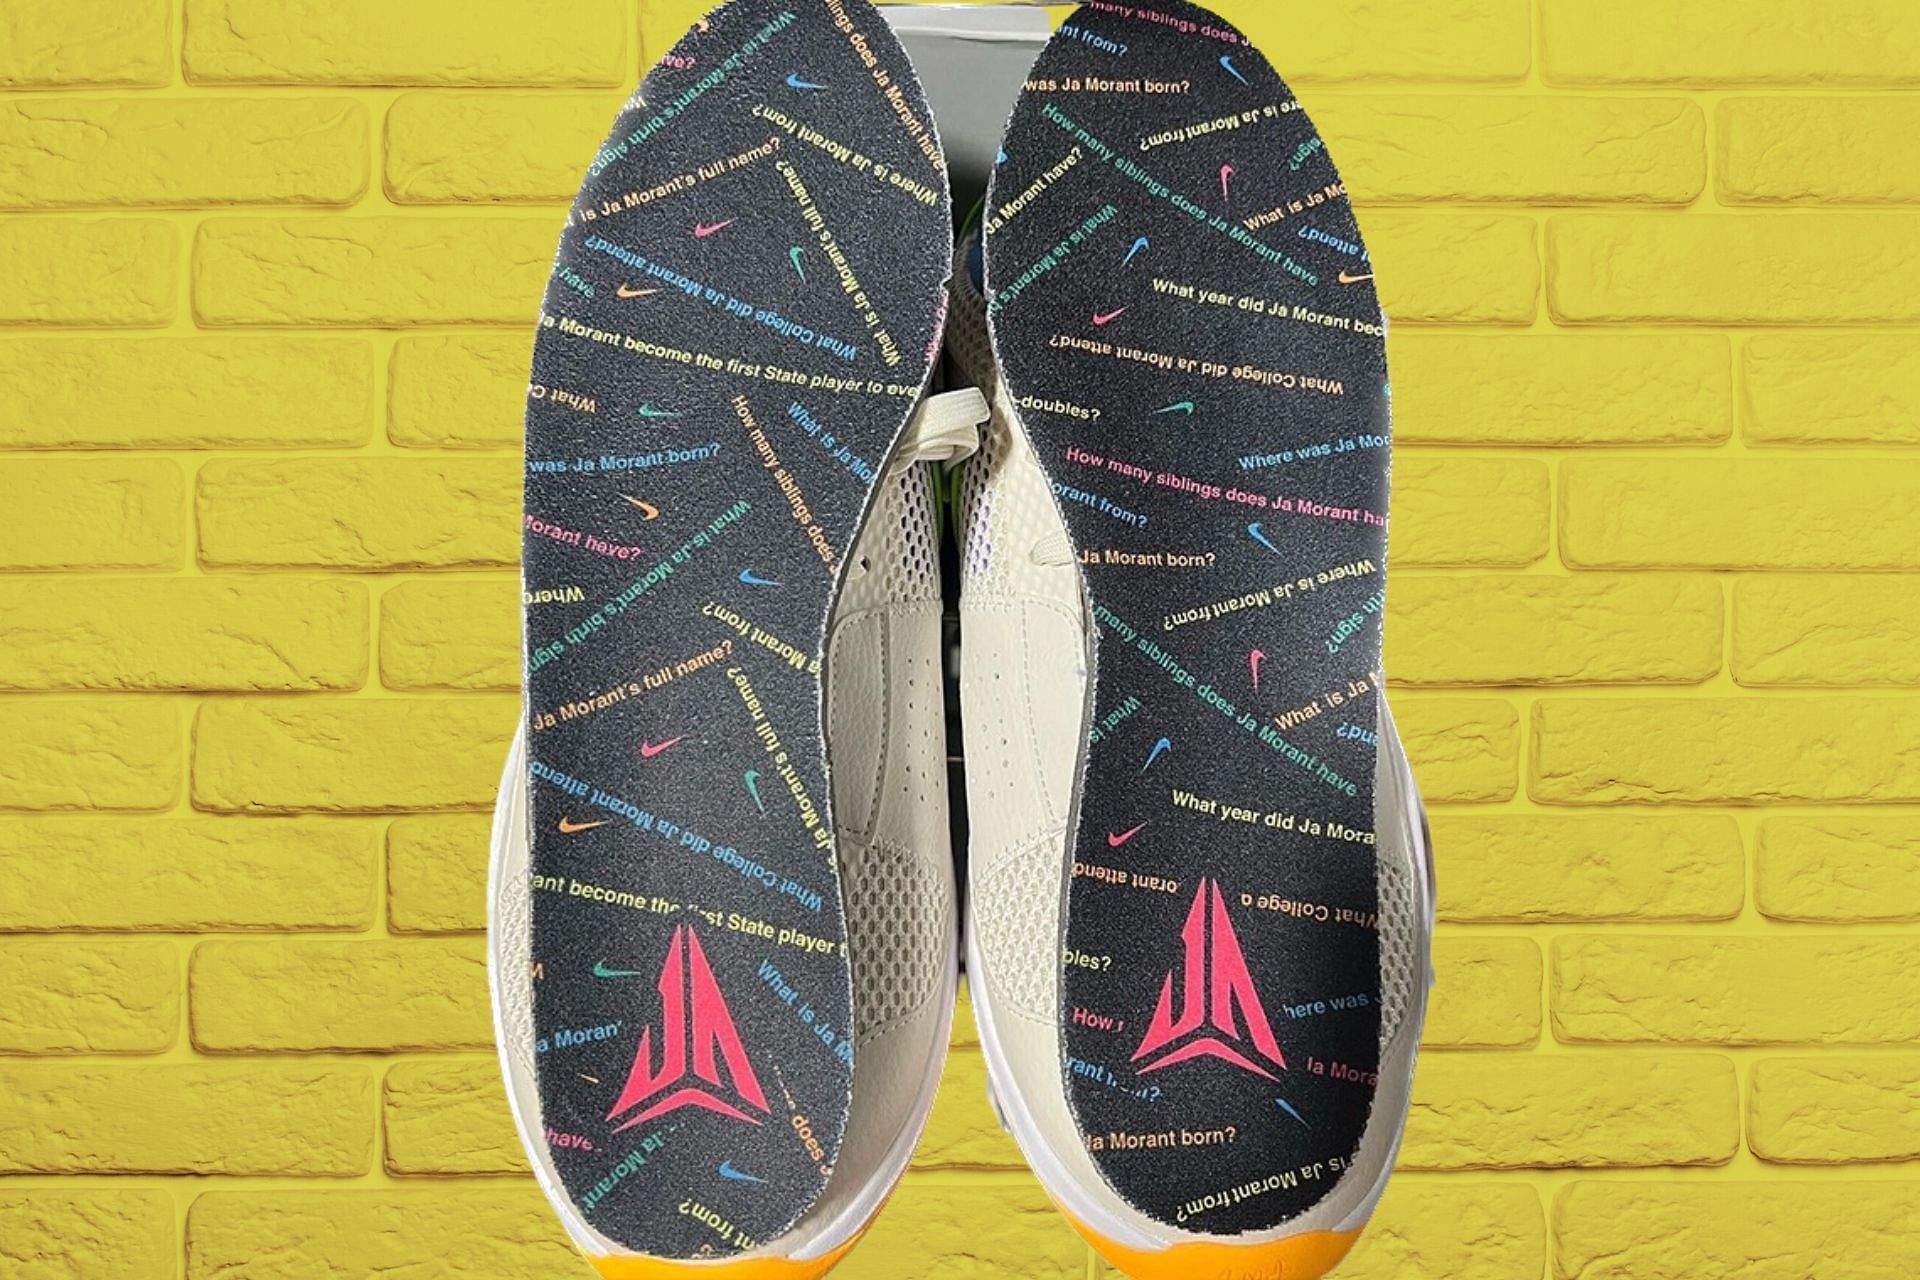 Here&#039;s a detailed view of the customized insoles (Image via Instagram/@masterchefian)